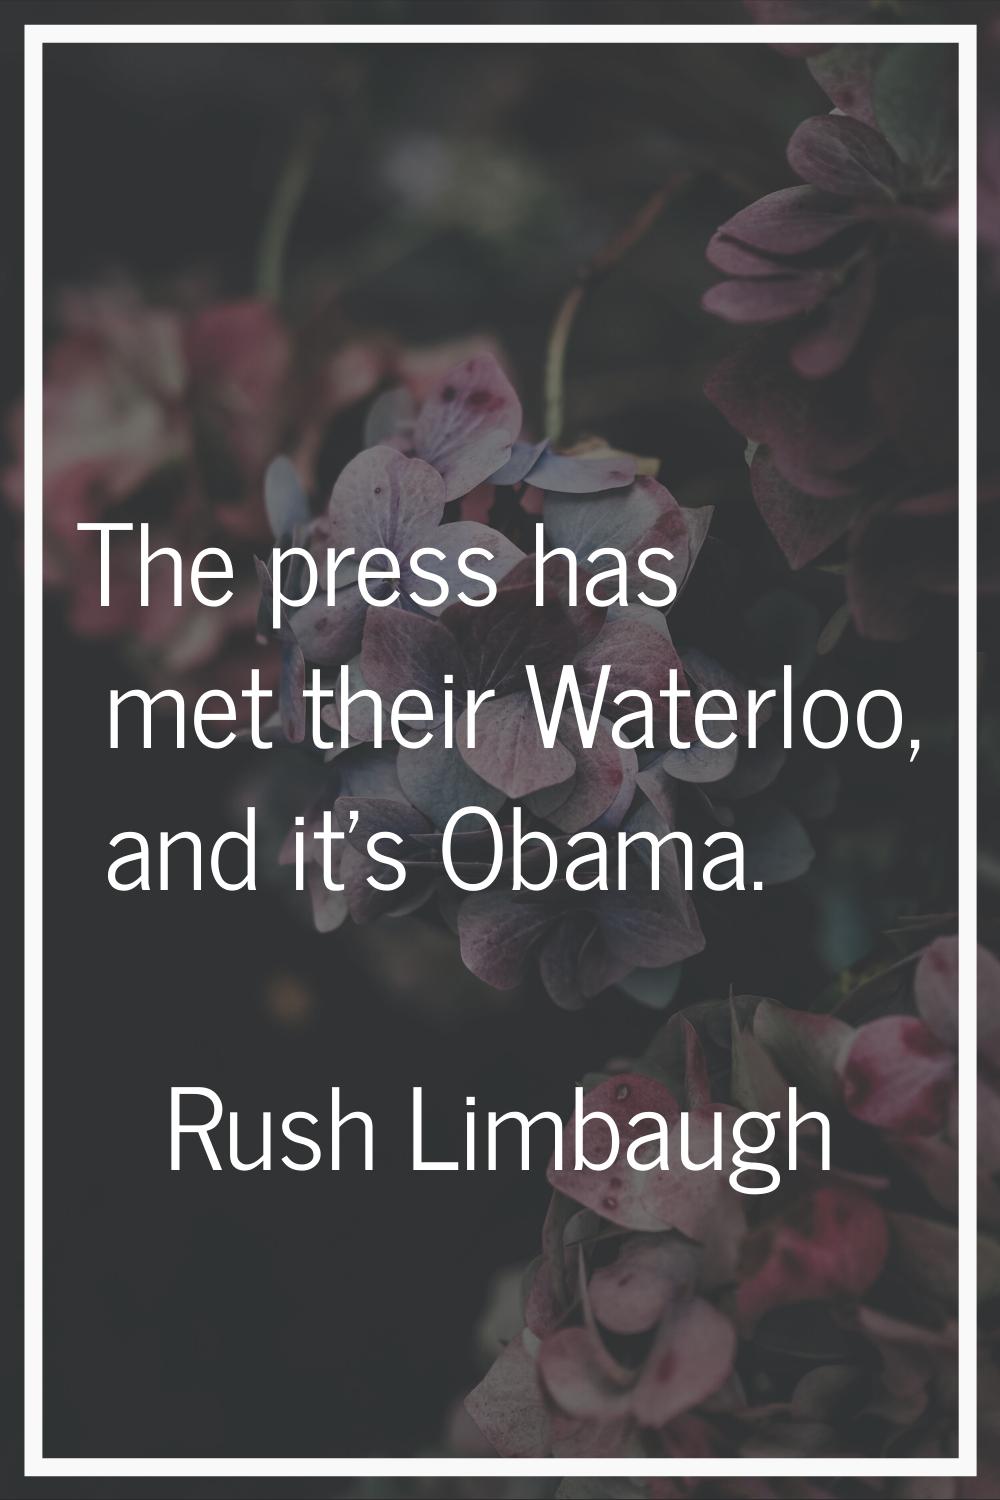 The press has met their Waterloo, and it's Obama.